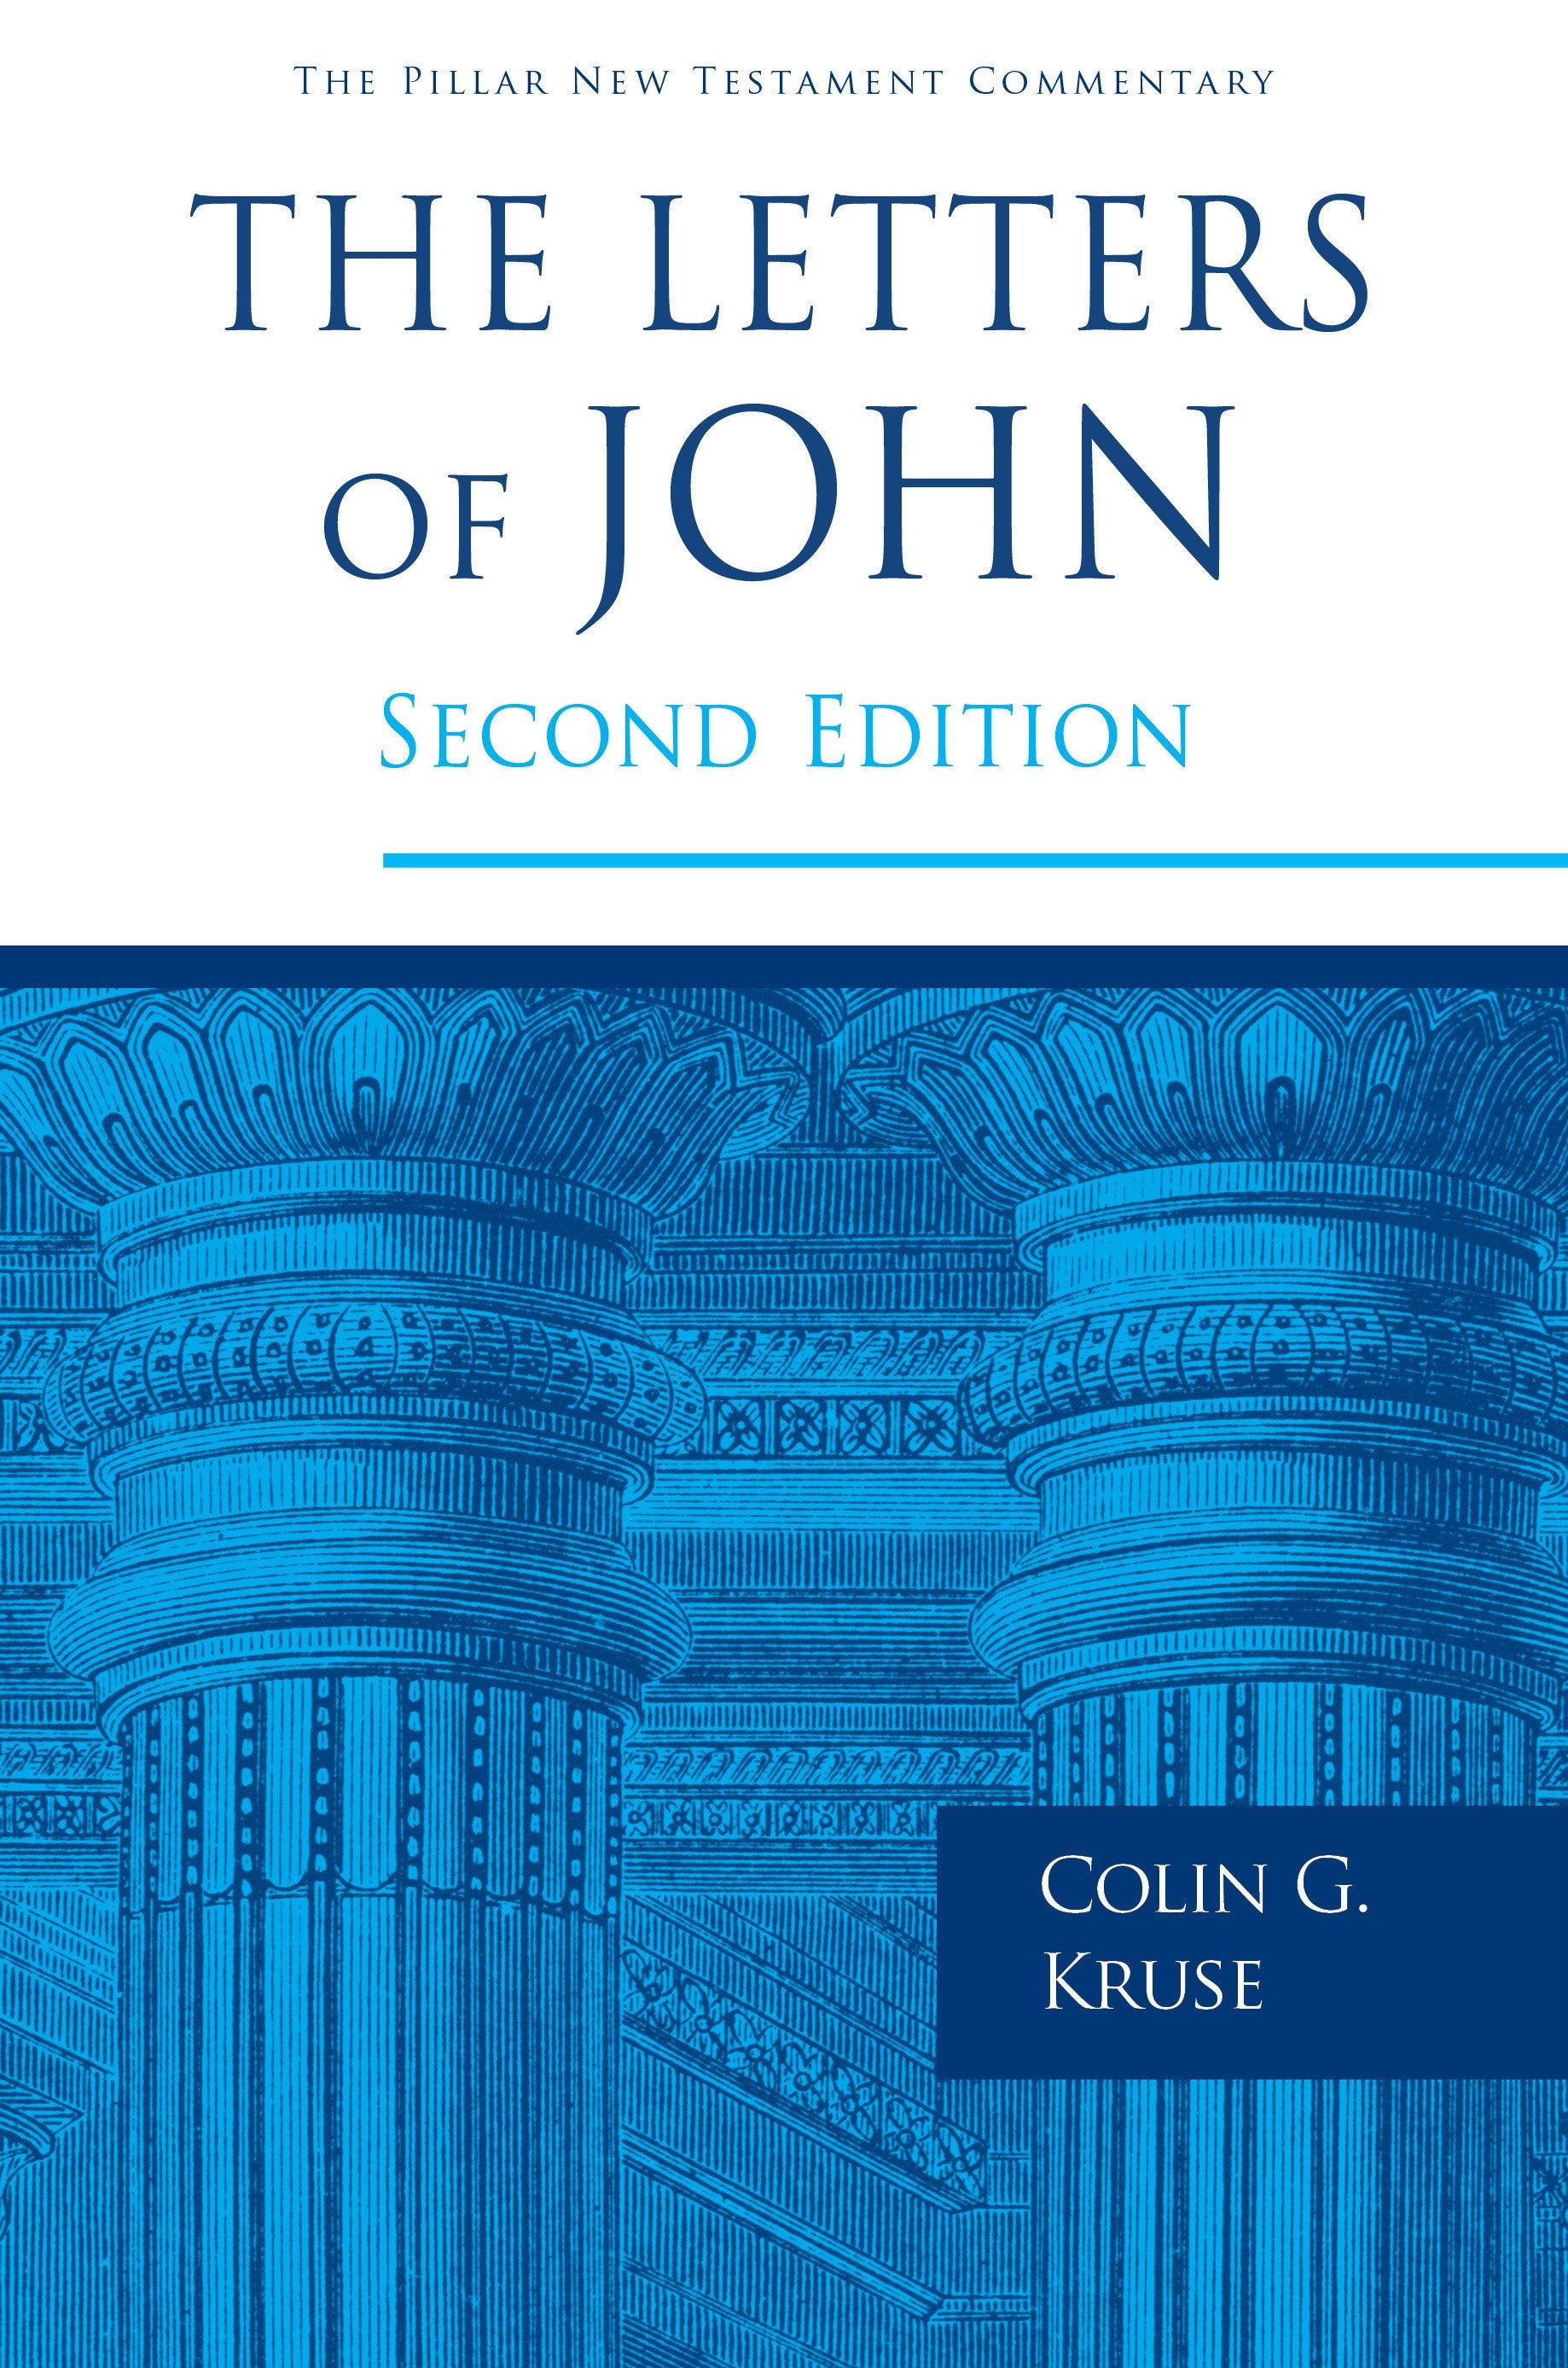 Image of Letters of John other